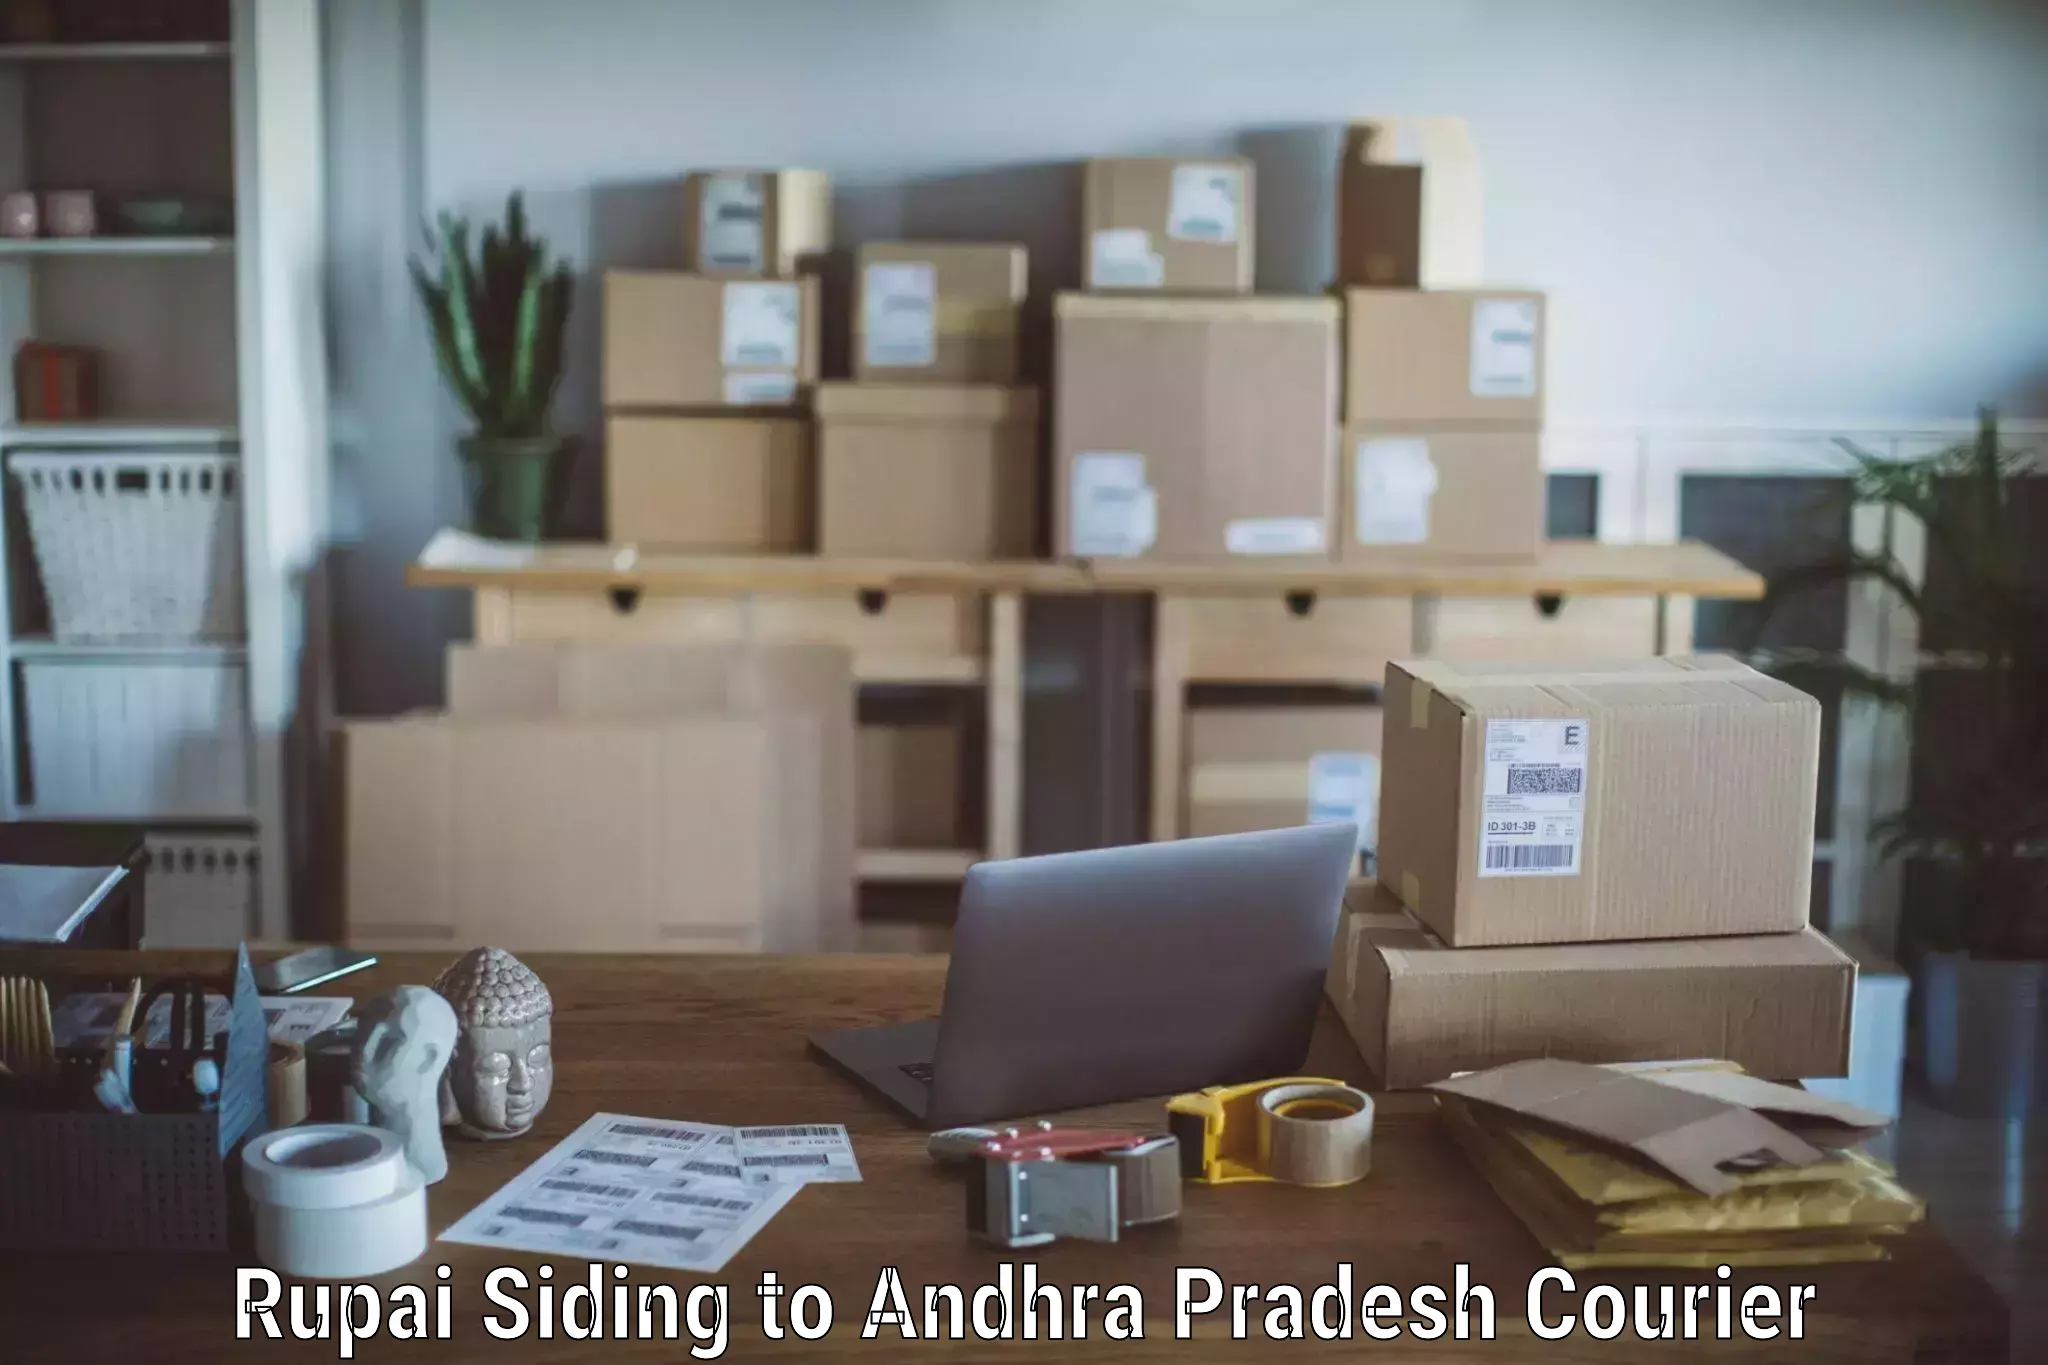 Quality moving and storage Rupai Siding to Cuddapah